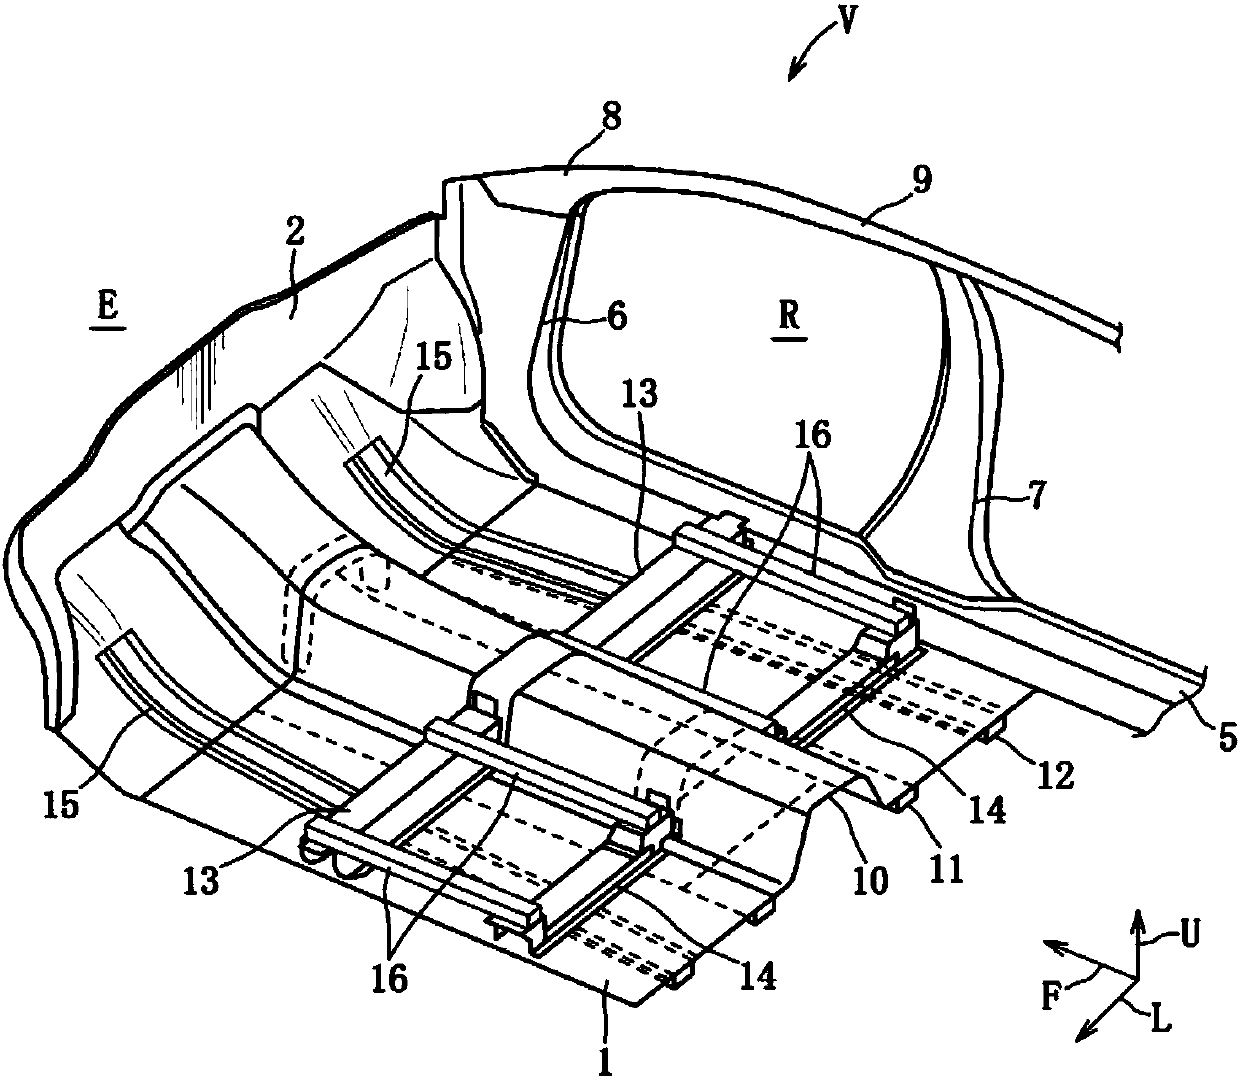 Reinforcing structure of vehicle body